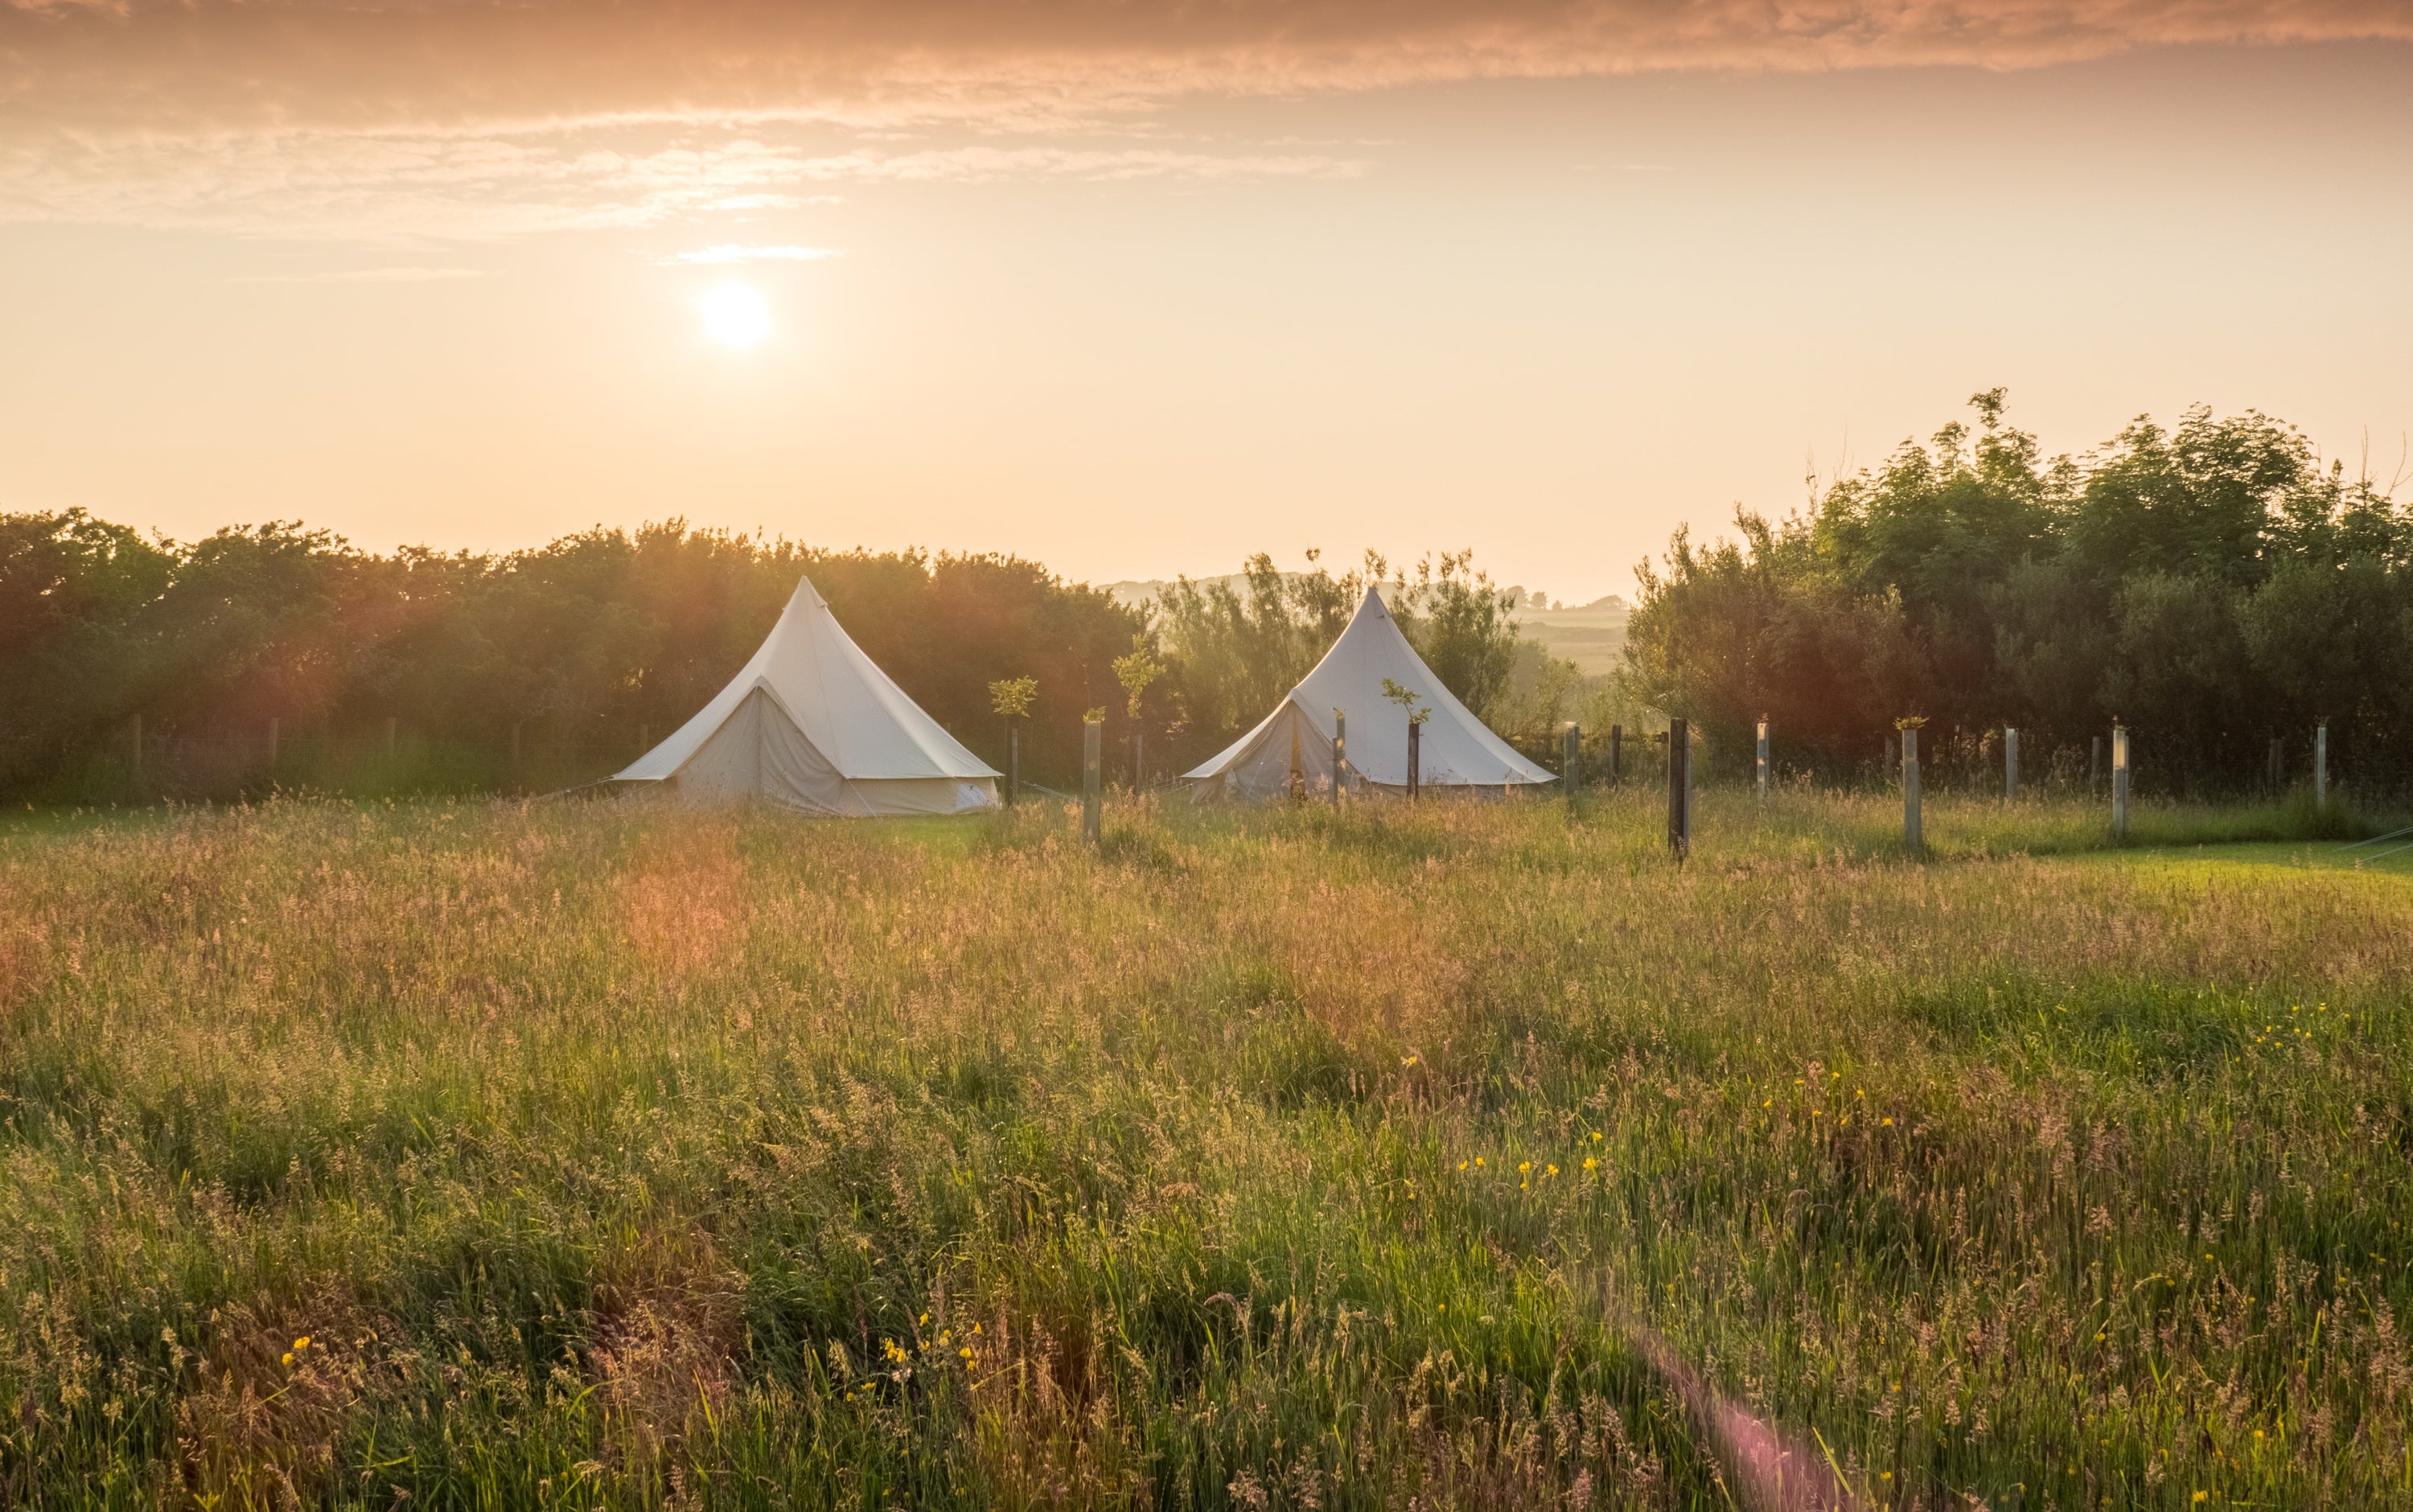 A canvas bell tent may be a worthy investment for regular campers